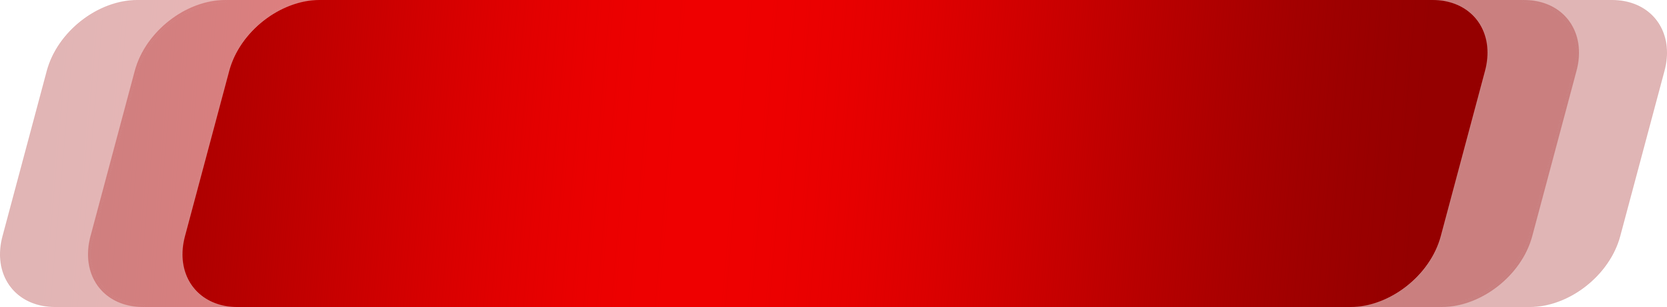 red banner and bar